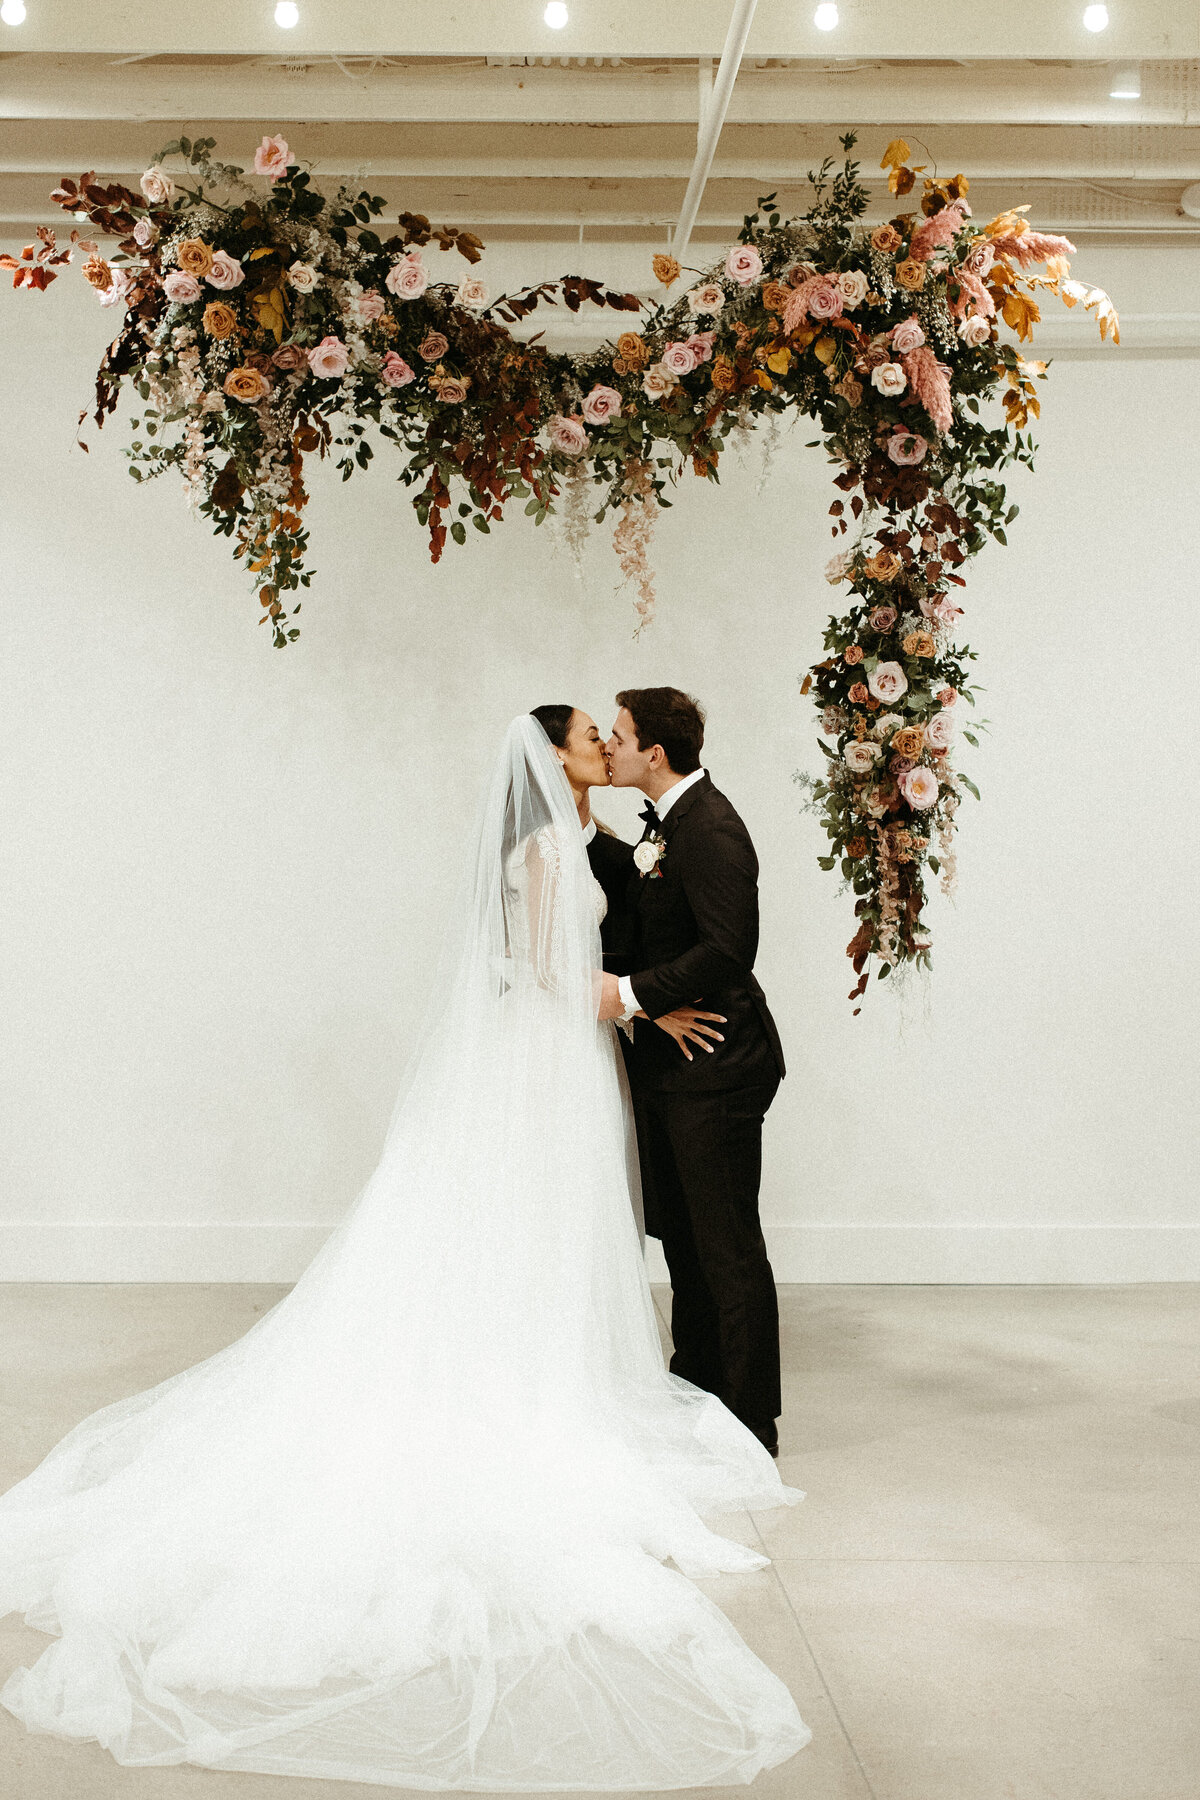 An eye-catching whimsical installation full of petal heavy roses and copper beech was the highlight of this art deco wedding. Terra cotta, burgundy, dusty pink, and other neutral florals warm up this ceremony. Designed by Rosemary and Finch in Nashville, TN.